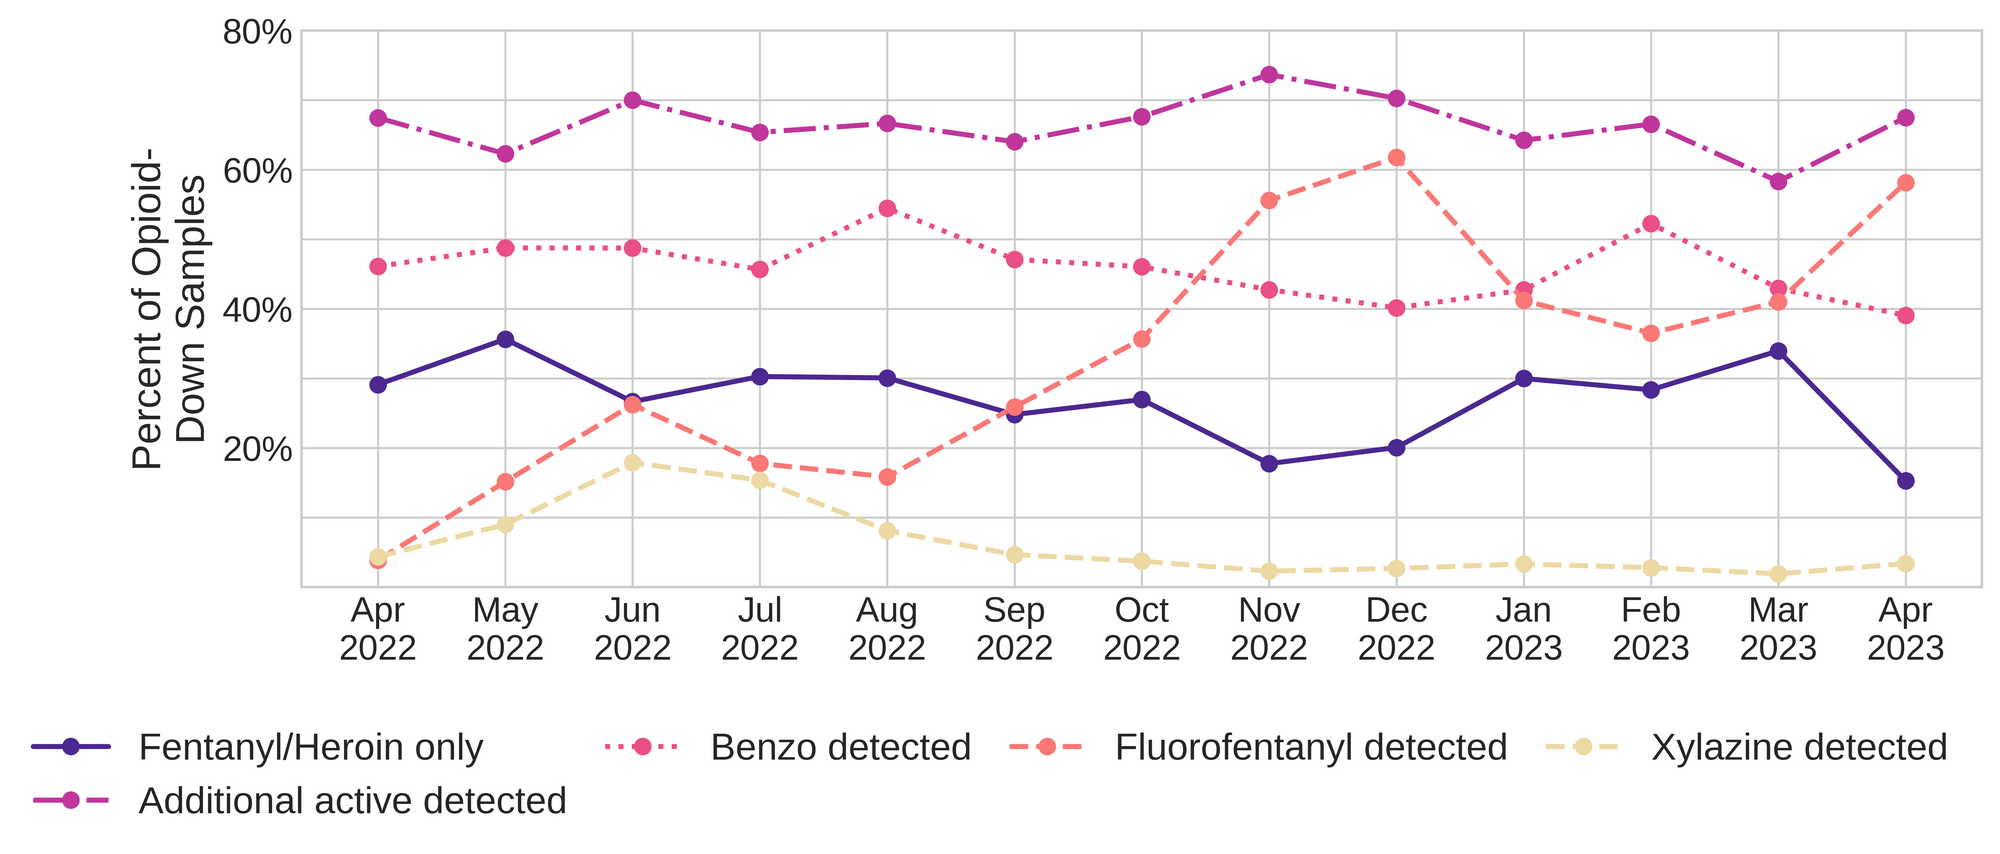 Figure 3. The percentage of expected opioid-down samples checked between April 2022 and April 2023 that only contained fentanyl/heroin actives (solid dark purple), opioid-down samples with an additional active detected (dot-dashed magenta), opioid-down samples that contained a benzodiazepine-related drug (dotted pink), opioid-down samples that contained fluorofentanyl (dashed salmon), and opioid-down samples that contained xylazine (dashed yellow).